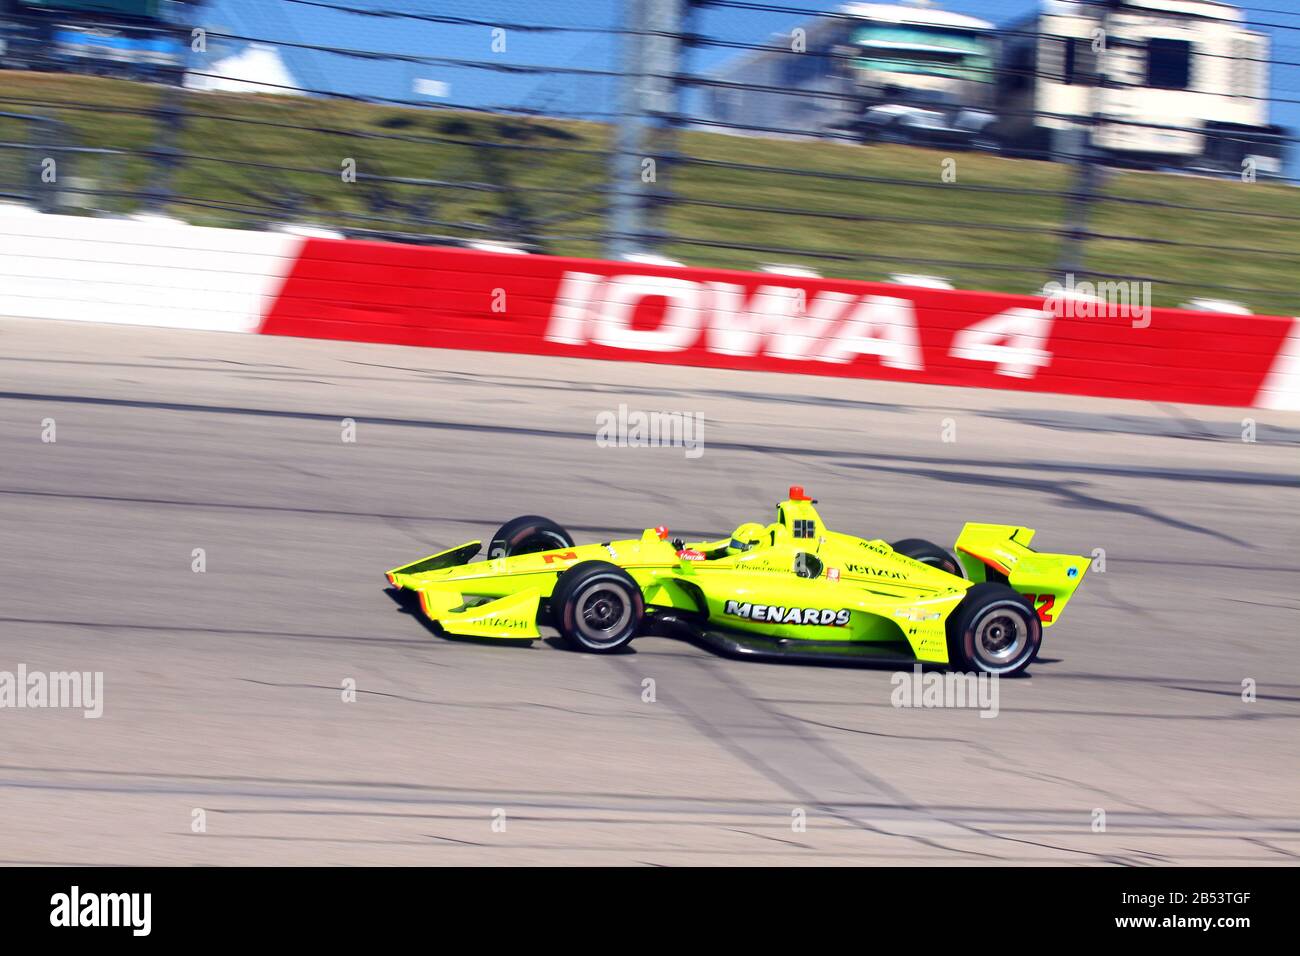 Newton Iowa, July 19, 2019: 22 Simon Pagenaud, France, Team Penske, on race track during practice session for the Iowa 300 Indycar race. Stock Photo